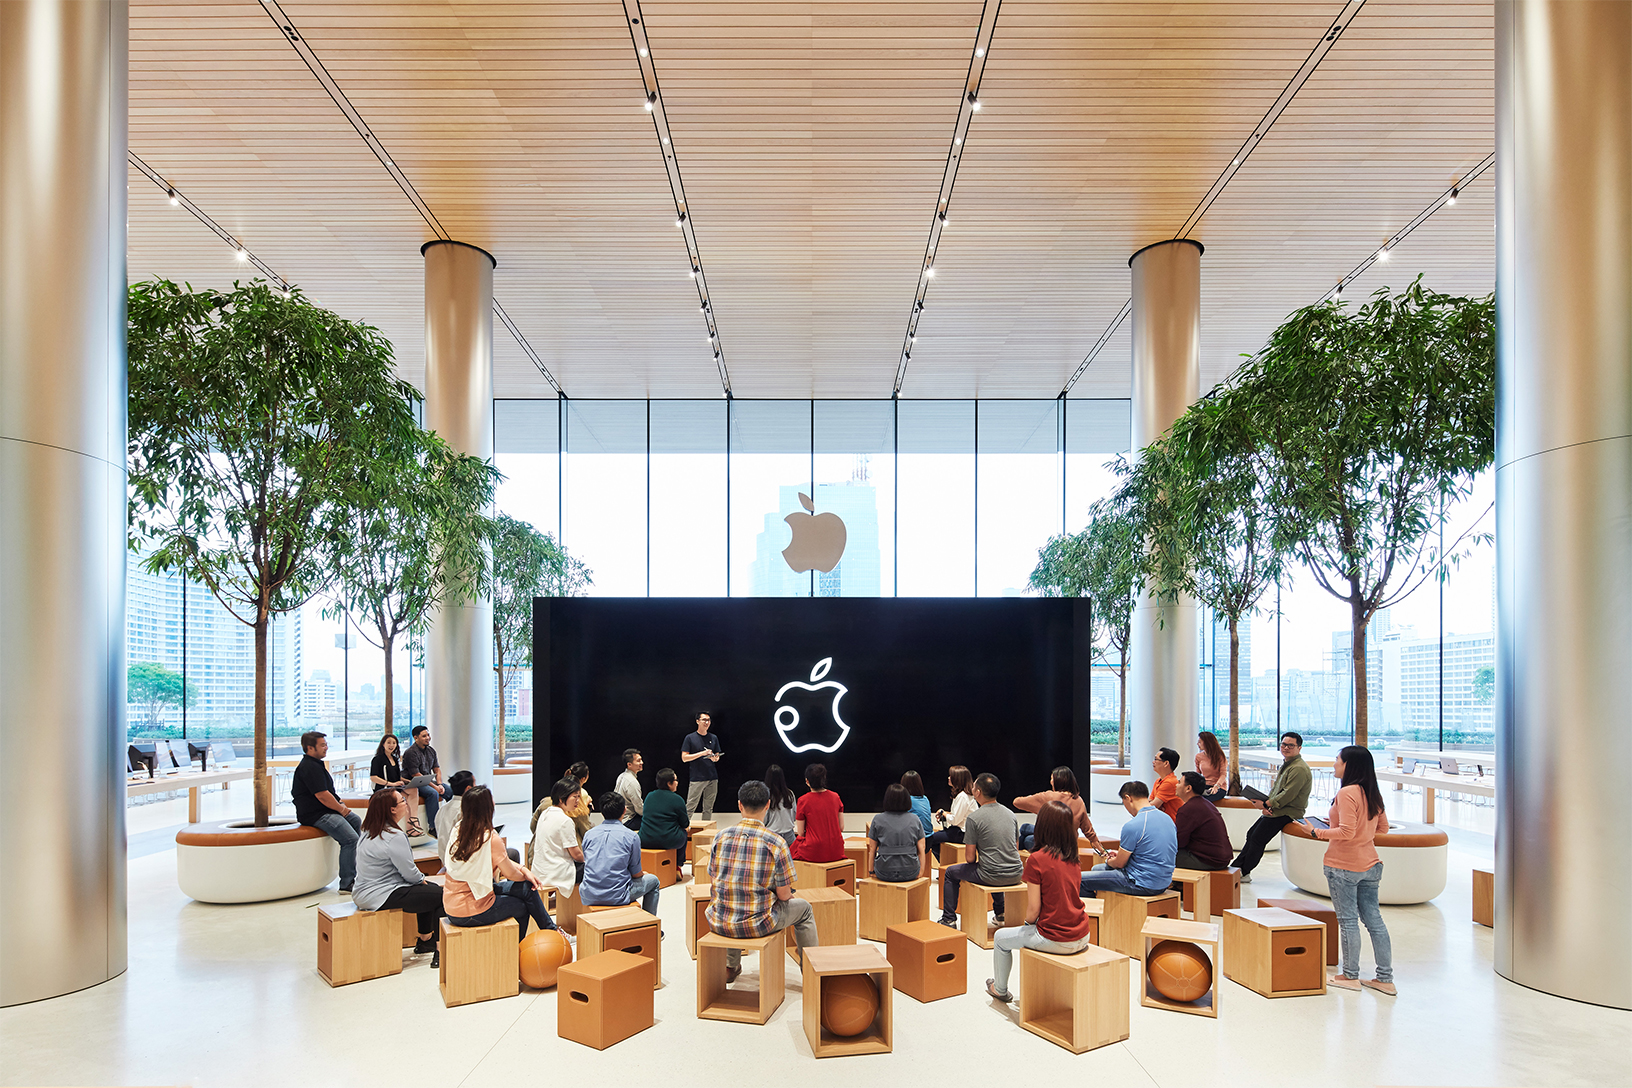 Apple Offers a Preview of Their First Thailand Store Ahead of Saturday's Grand Opening